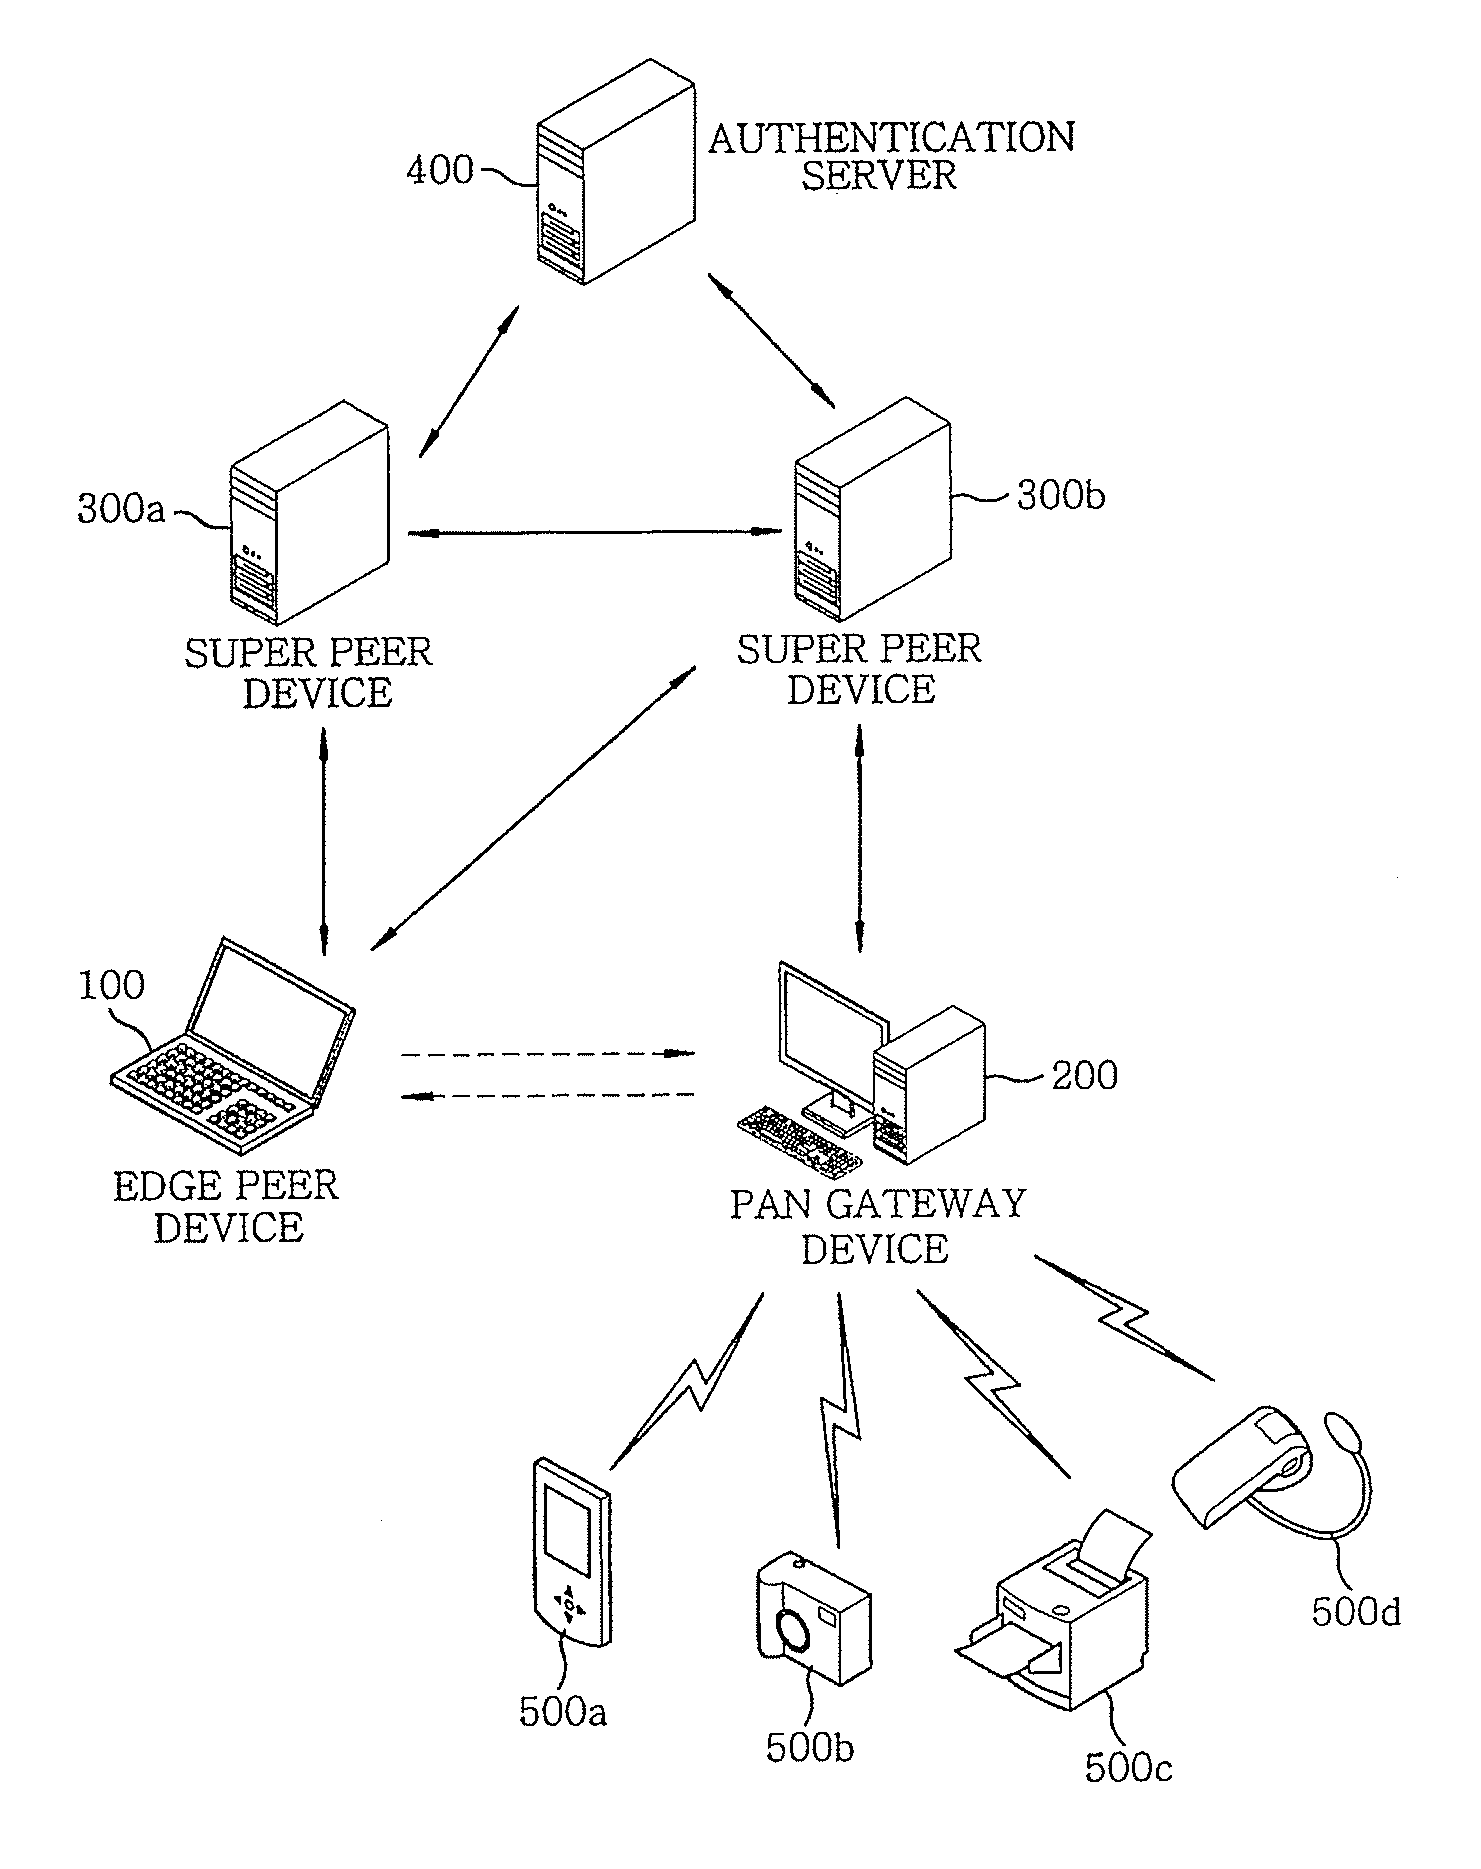 Edge peer device, pan gateway device, super peer device, and p2p network-based interconnection method